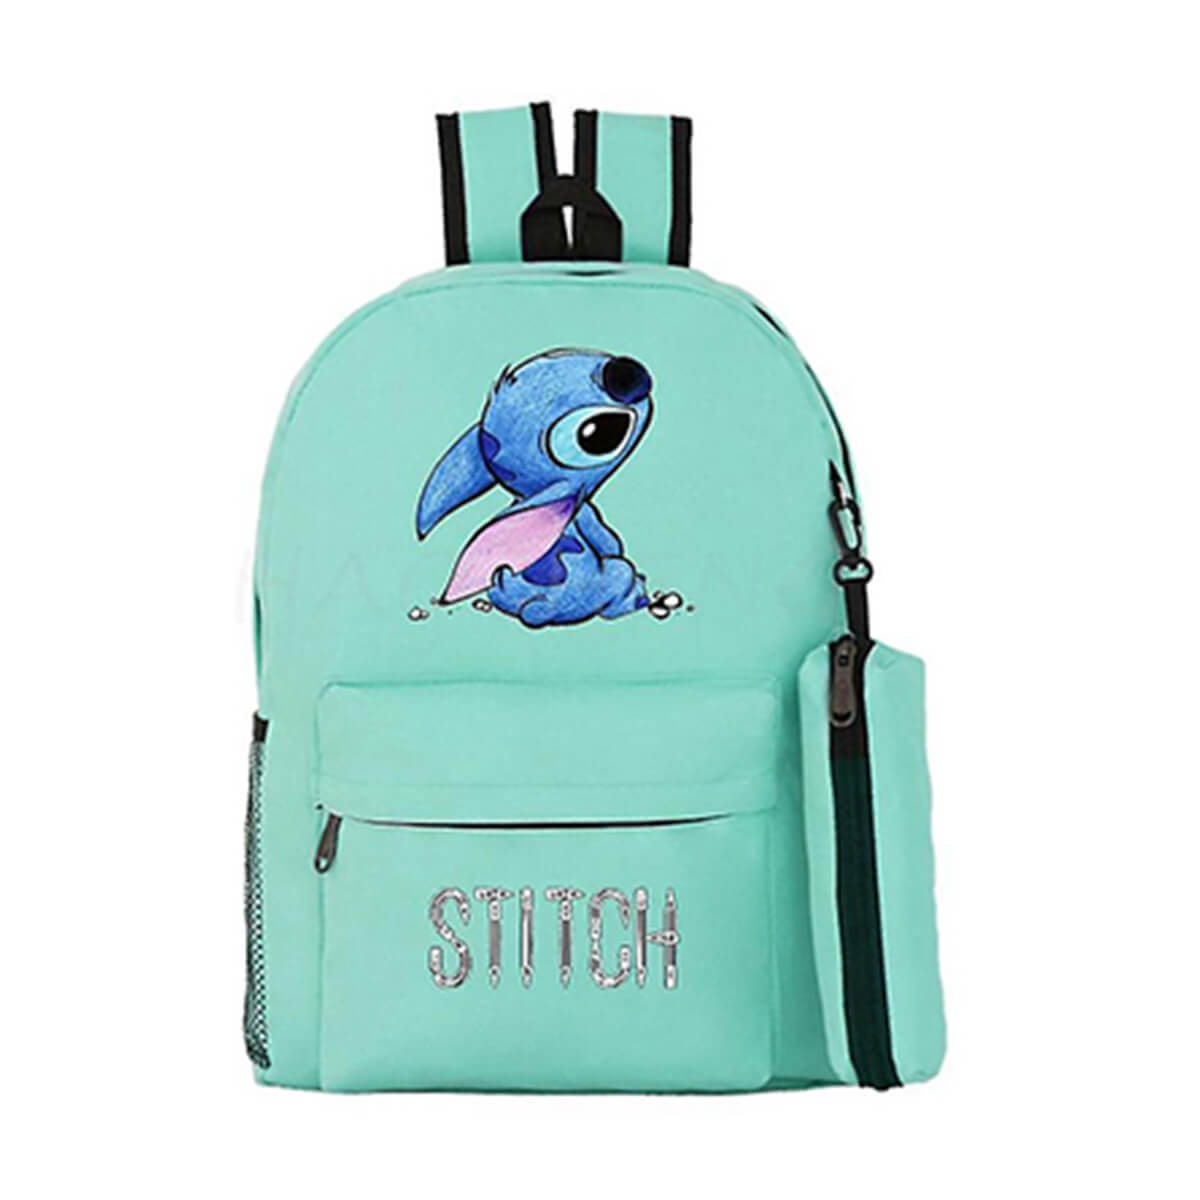 Kids School Bag with Pouch